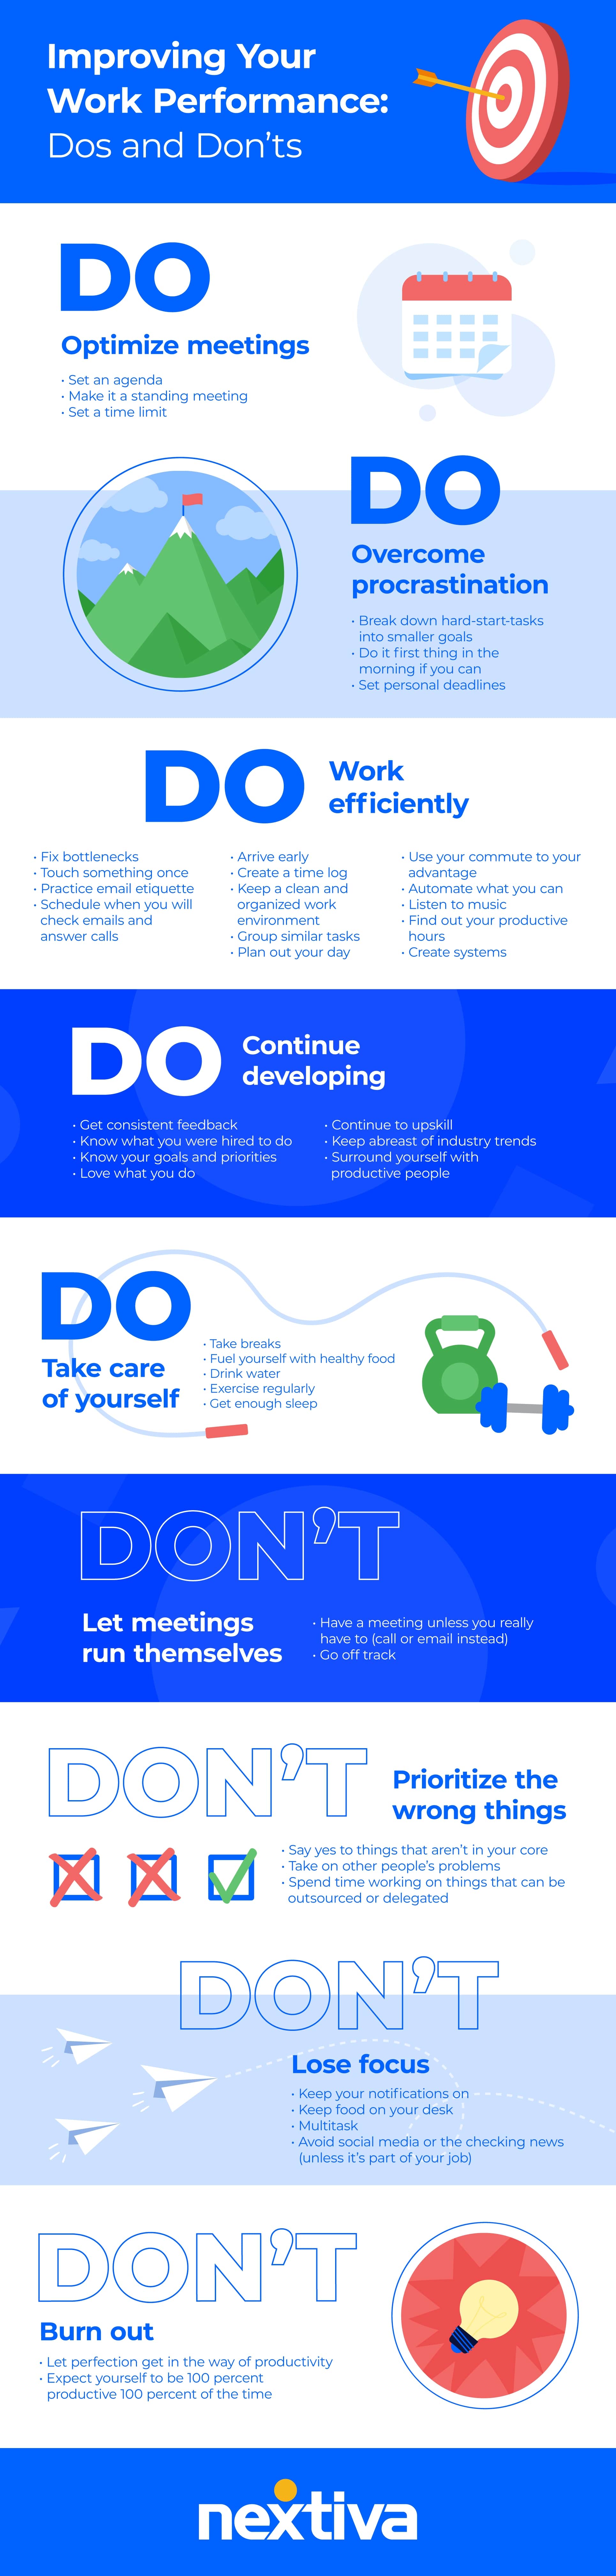 Infographic showing ways to improve work performance